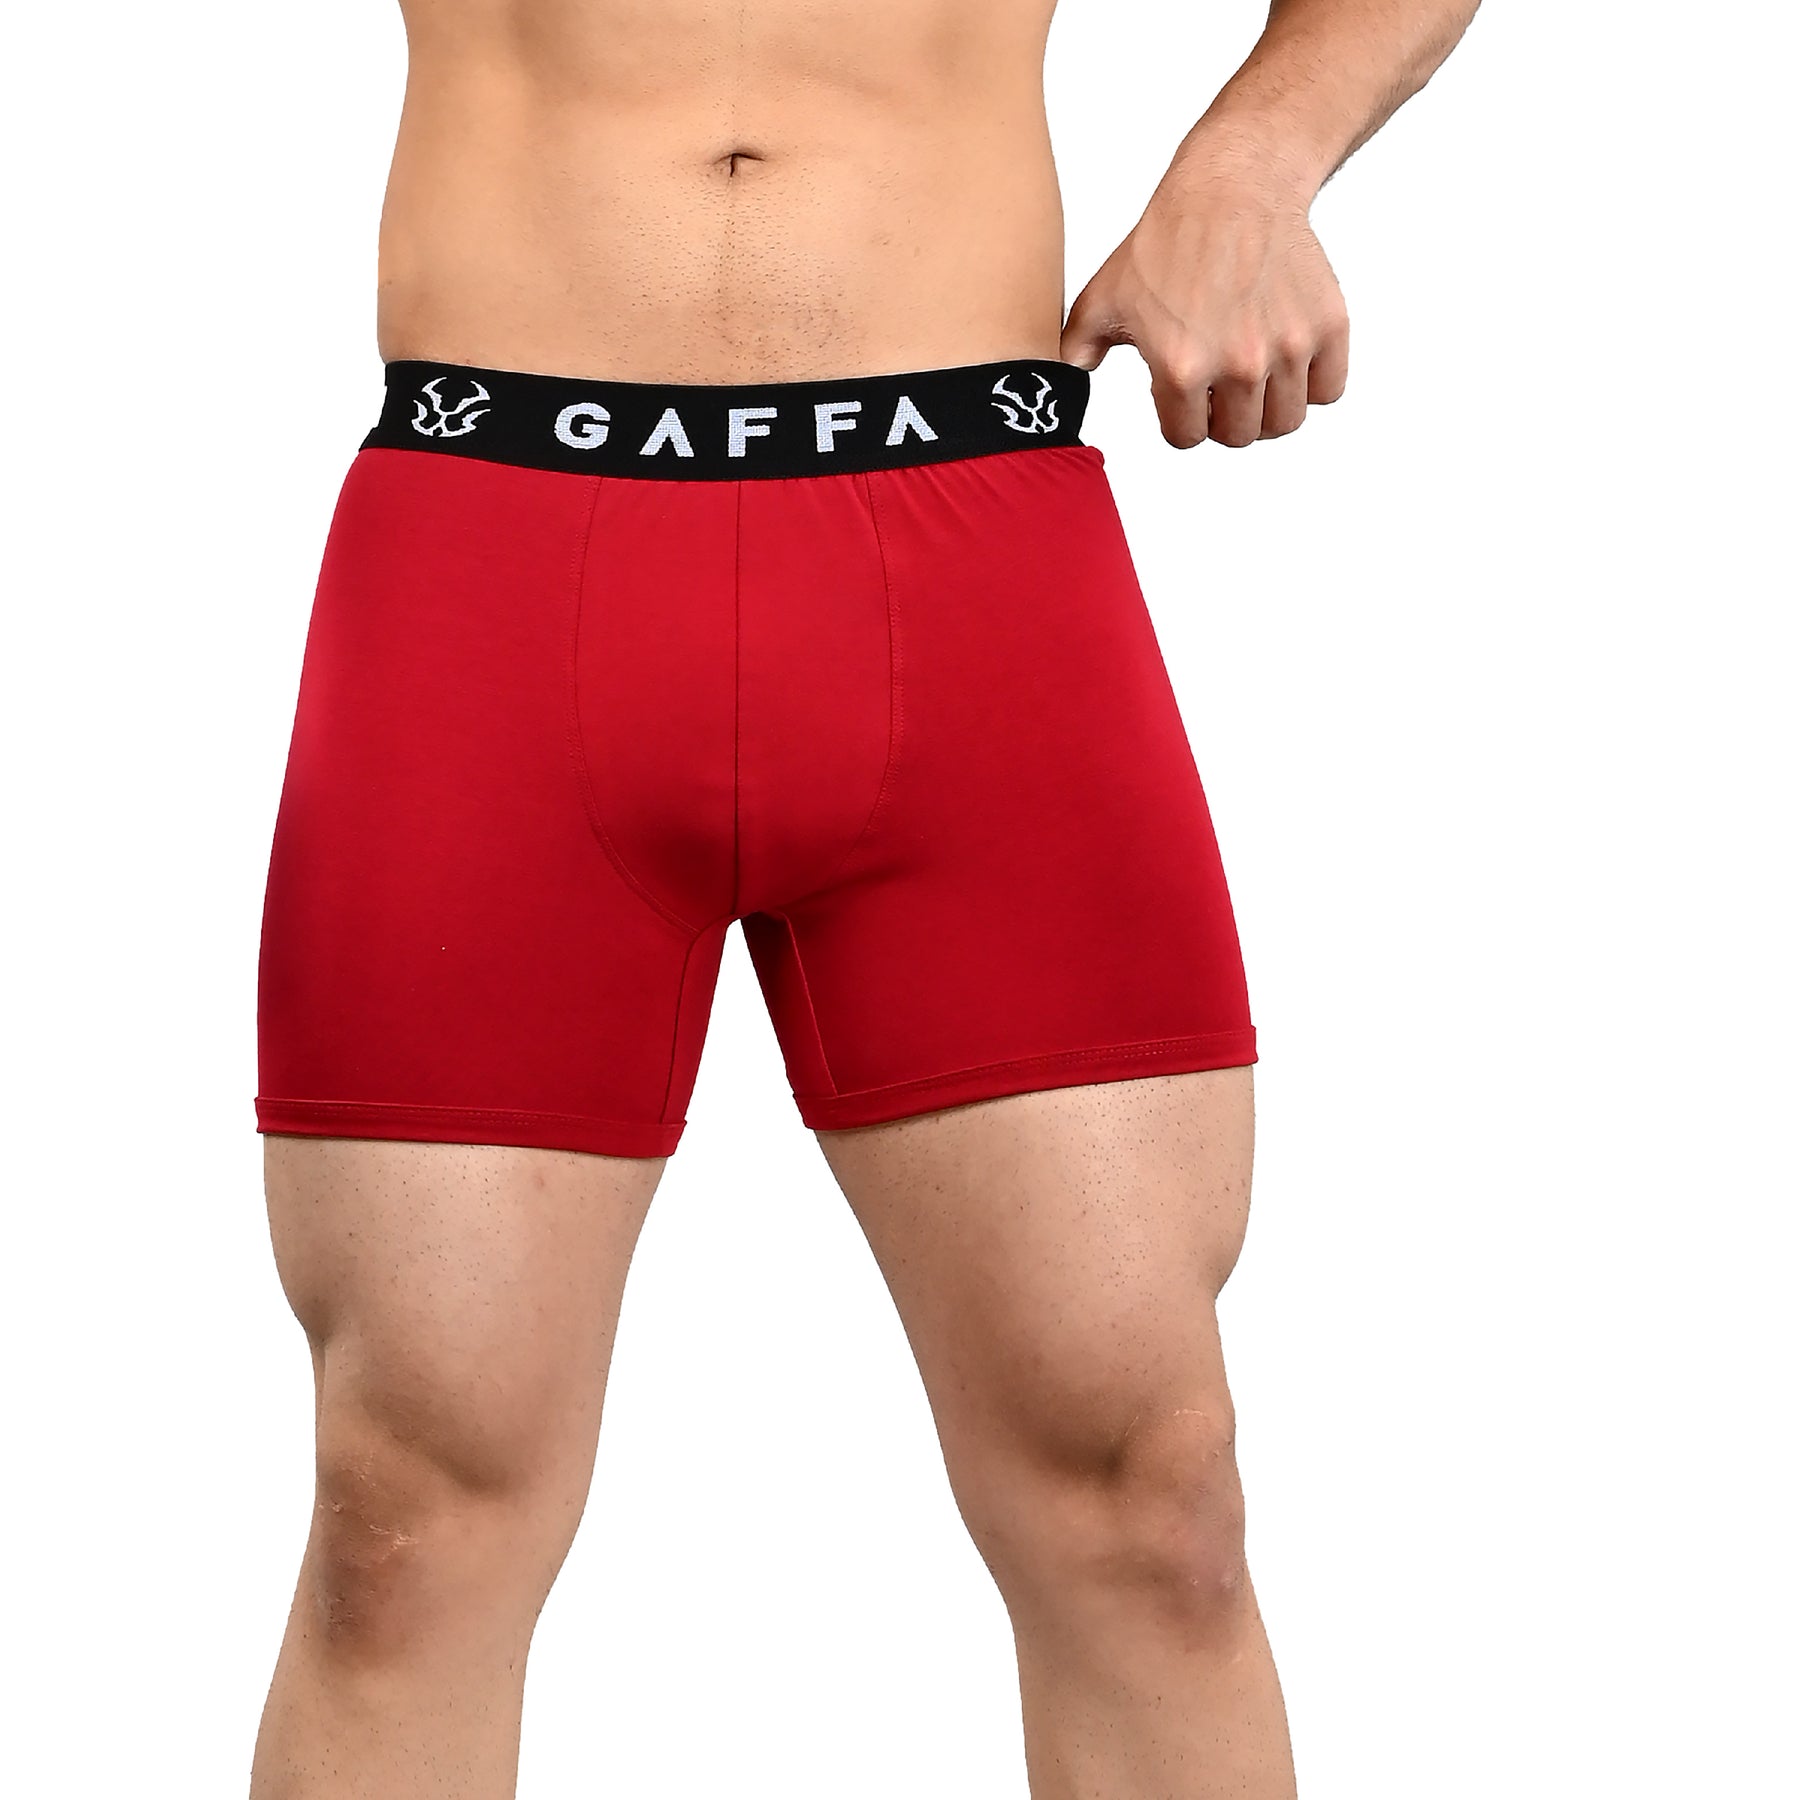 Men's Underwear Trunks Bold Black + Raging Red + Charcoal Grey Pack of 3